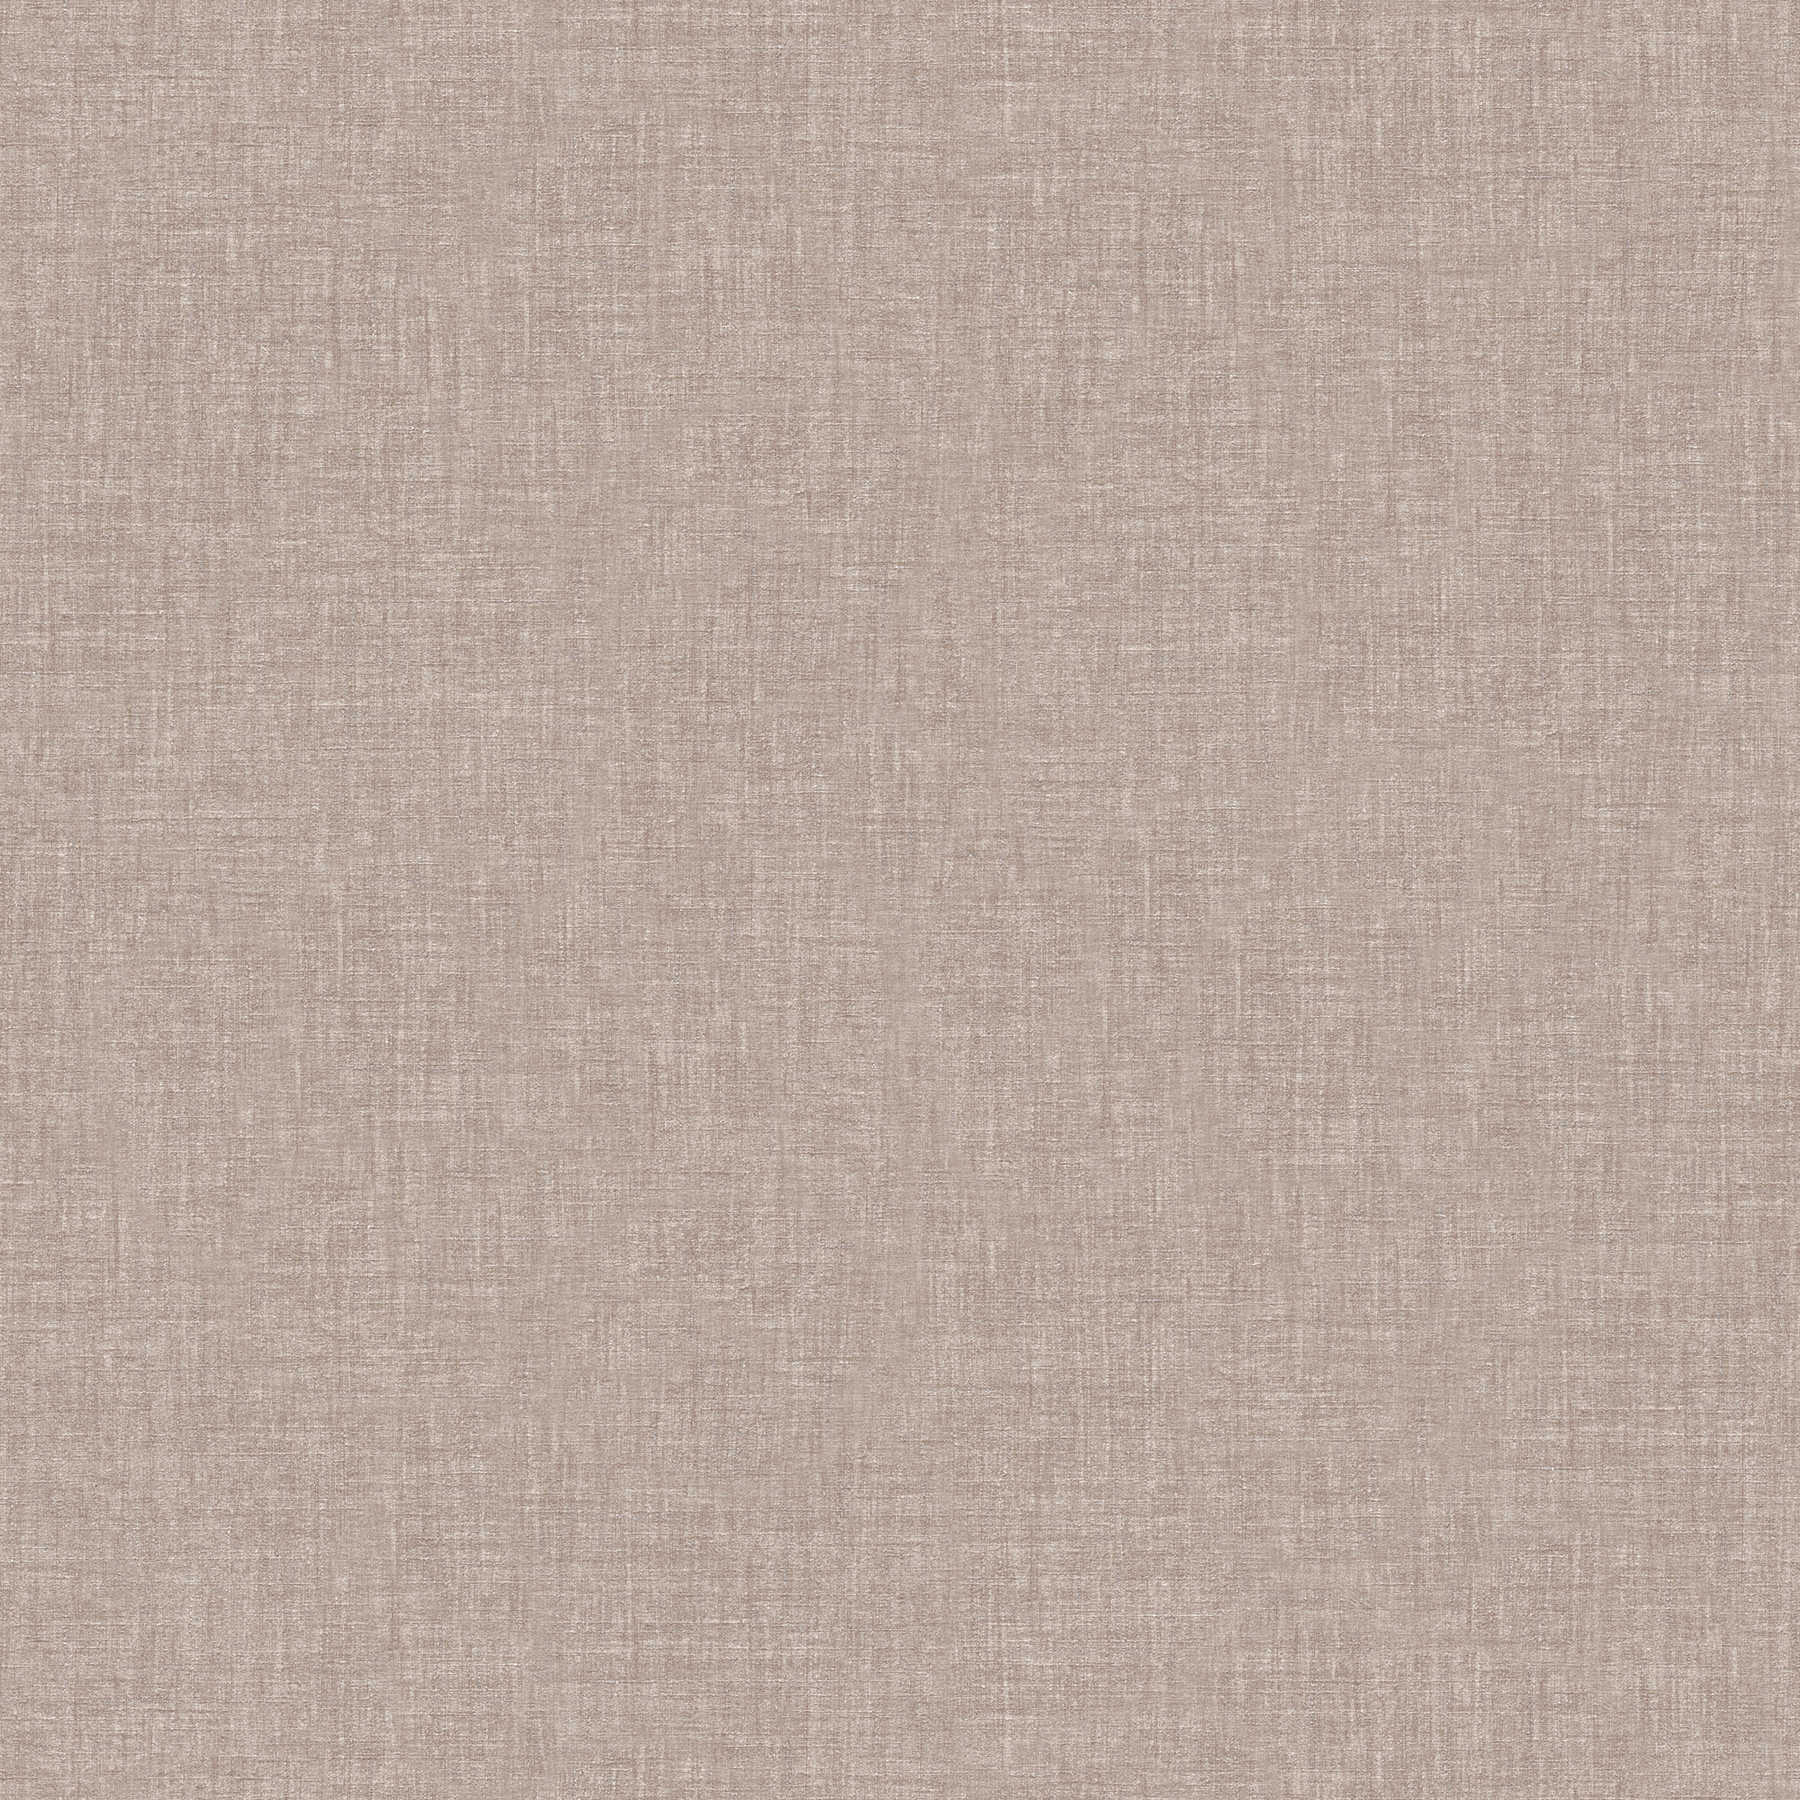 Non-woven wallpaper taupe with fabric texture & textile effect
